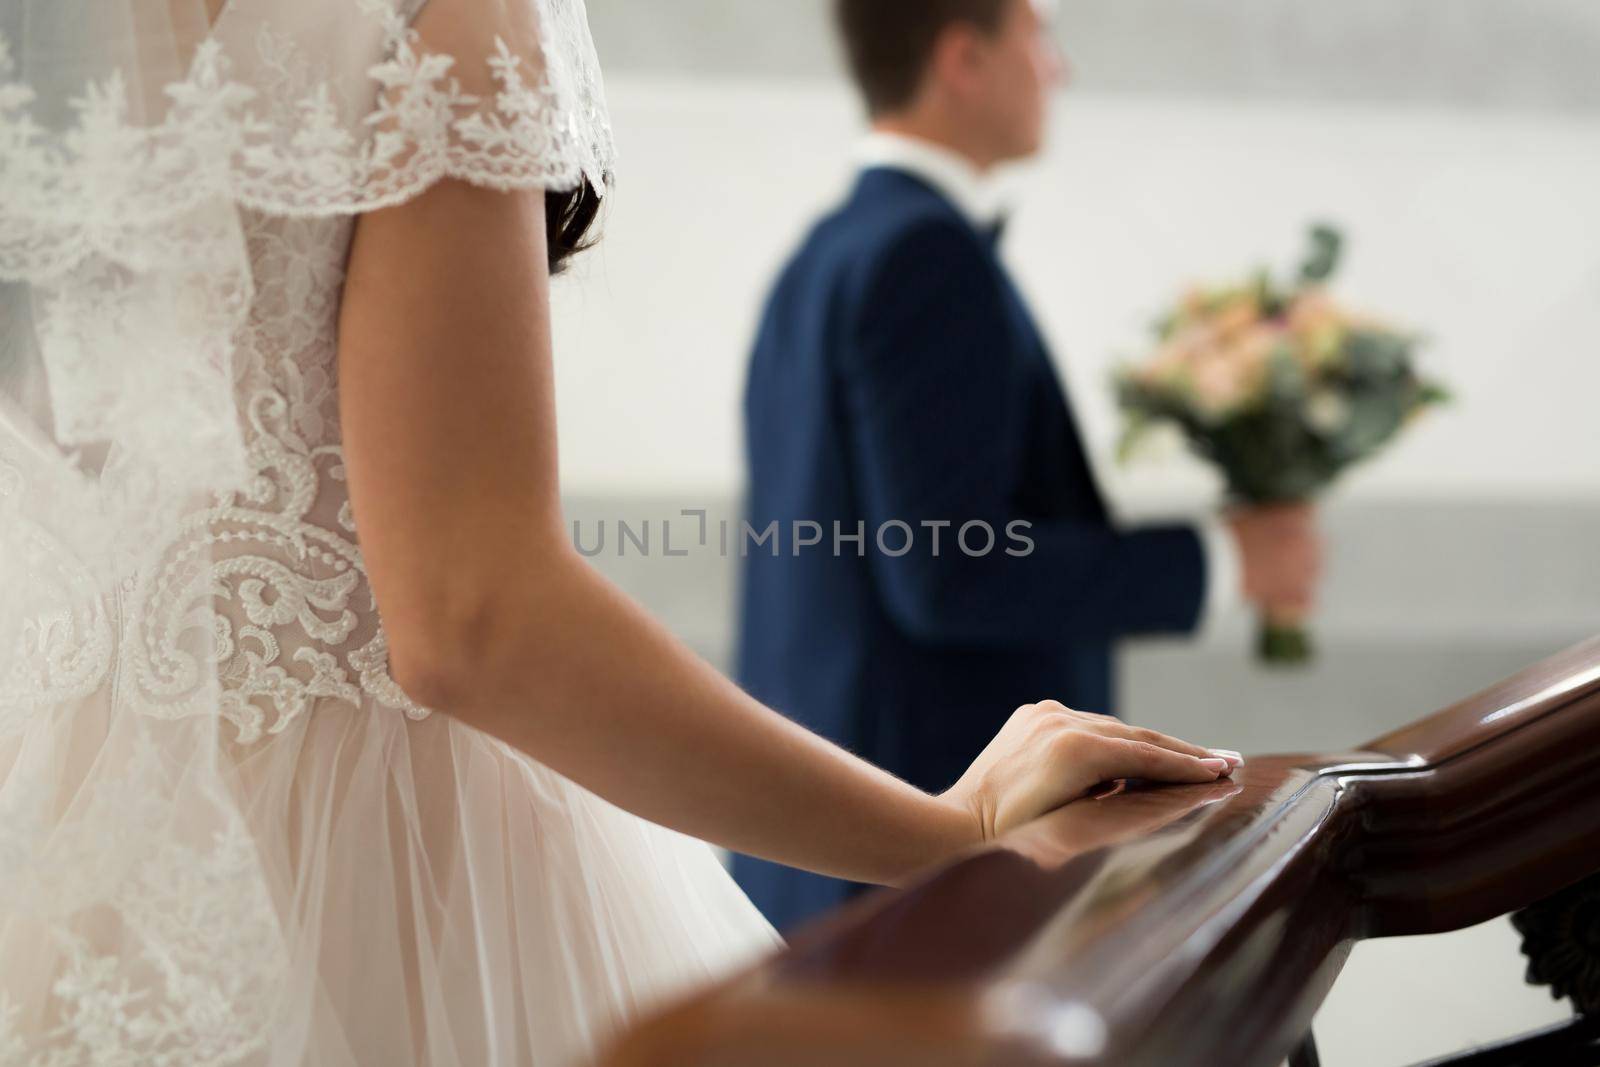 The bride goes to meet the groom. hand on a wooden railing close up. by StudioPeace